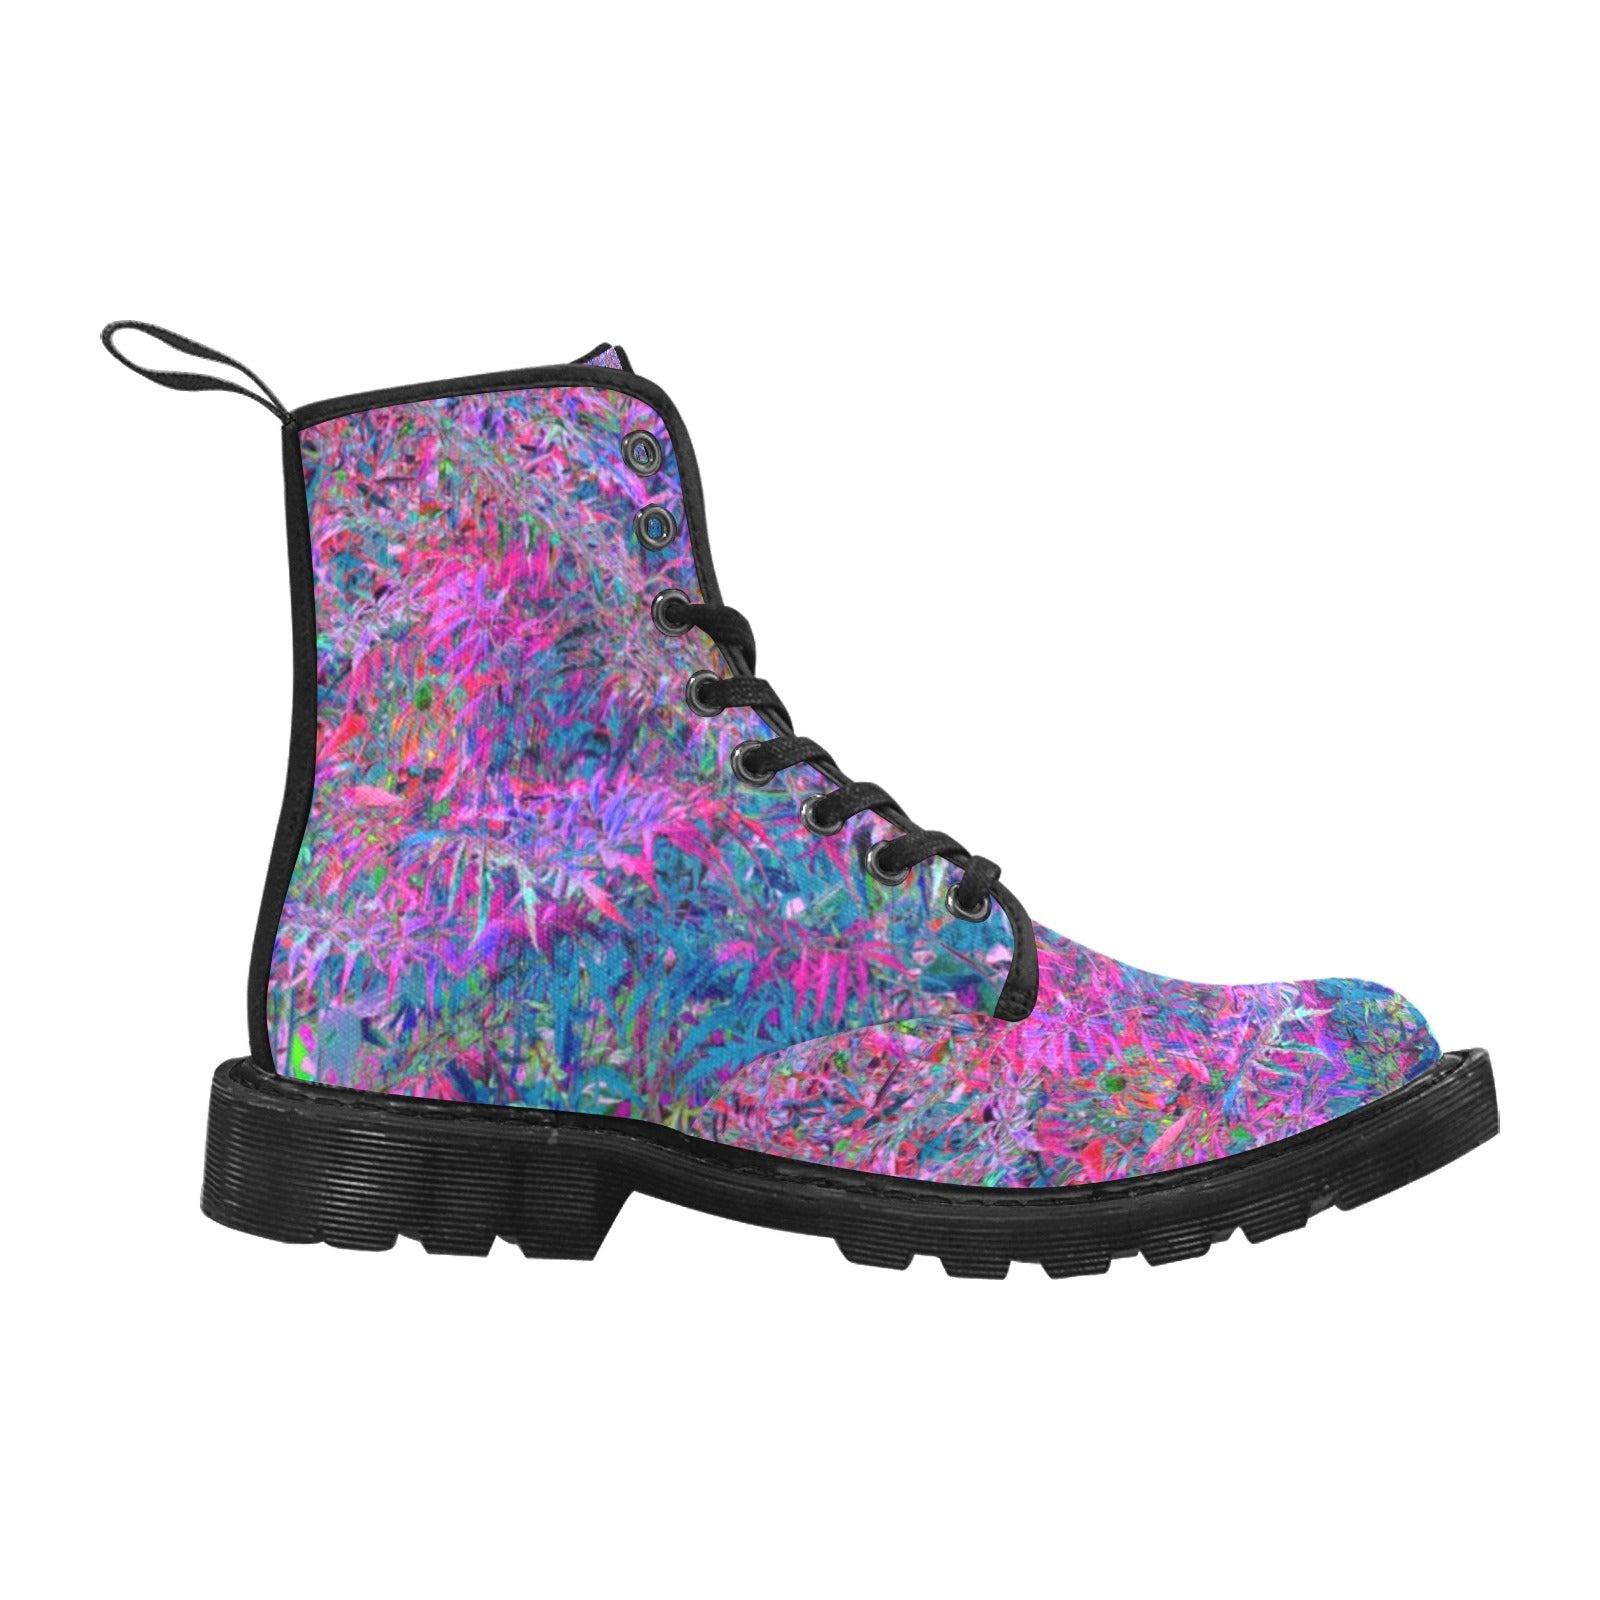 Boots for Women, Abstract Psychedelic Rainbow Colors Foliage Garden - Black